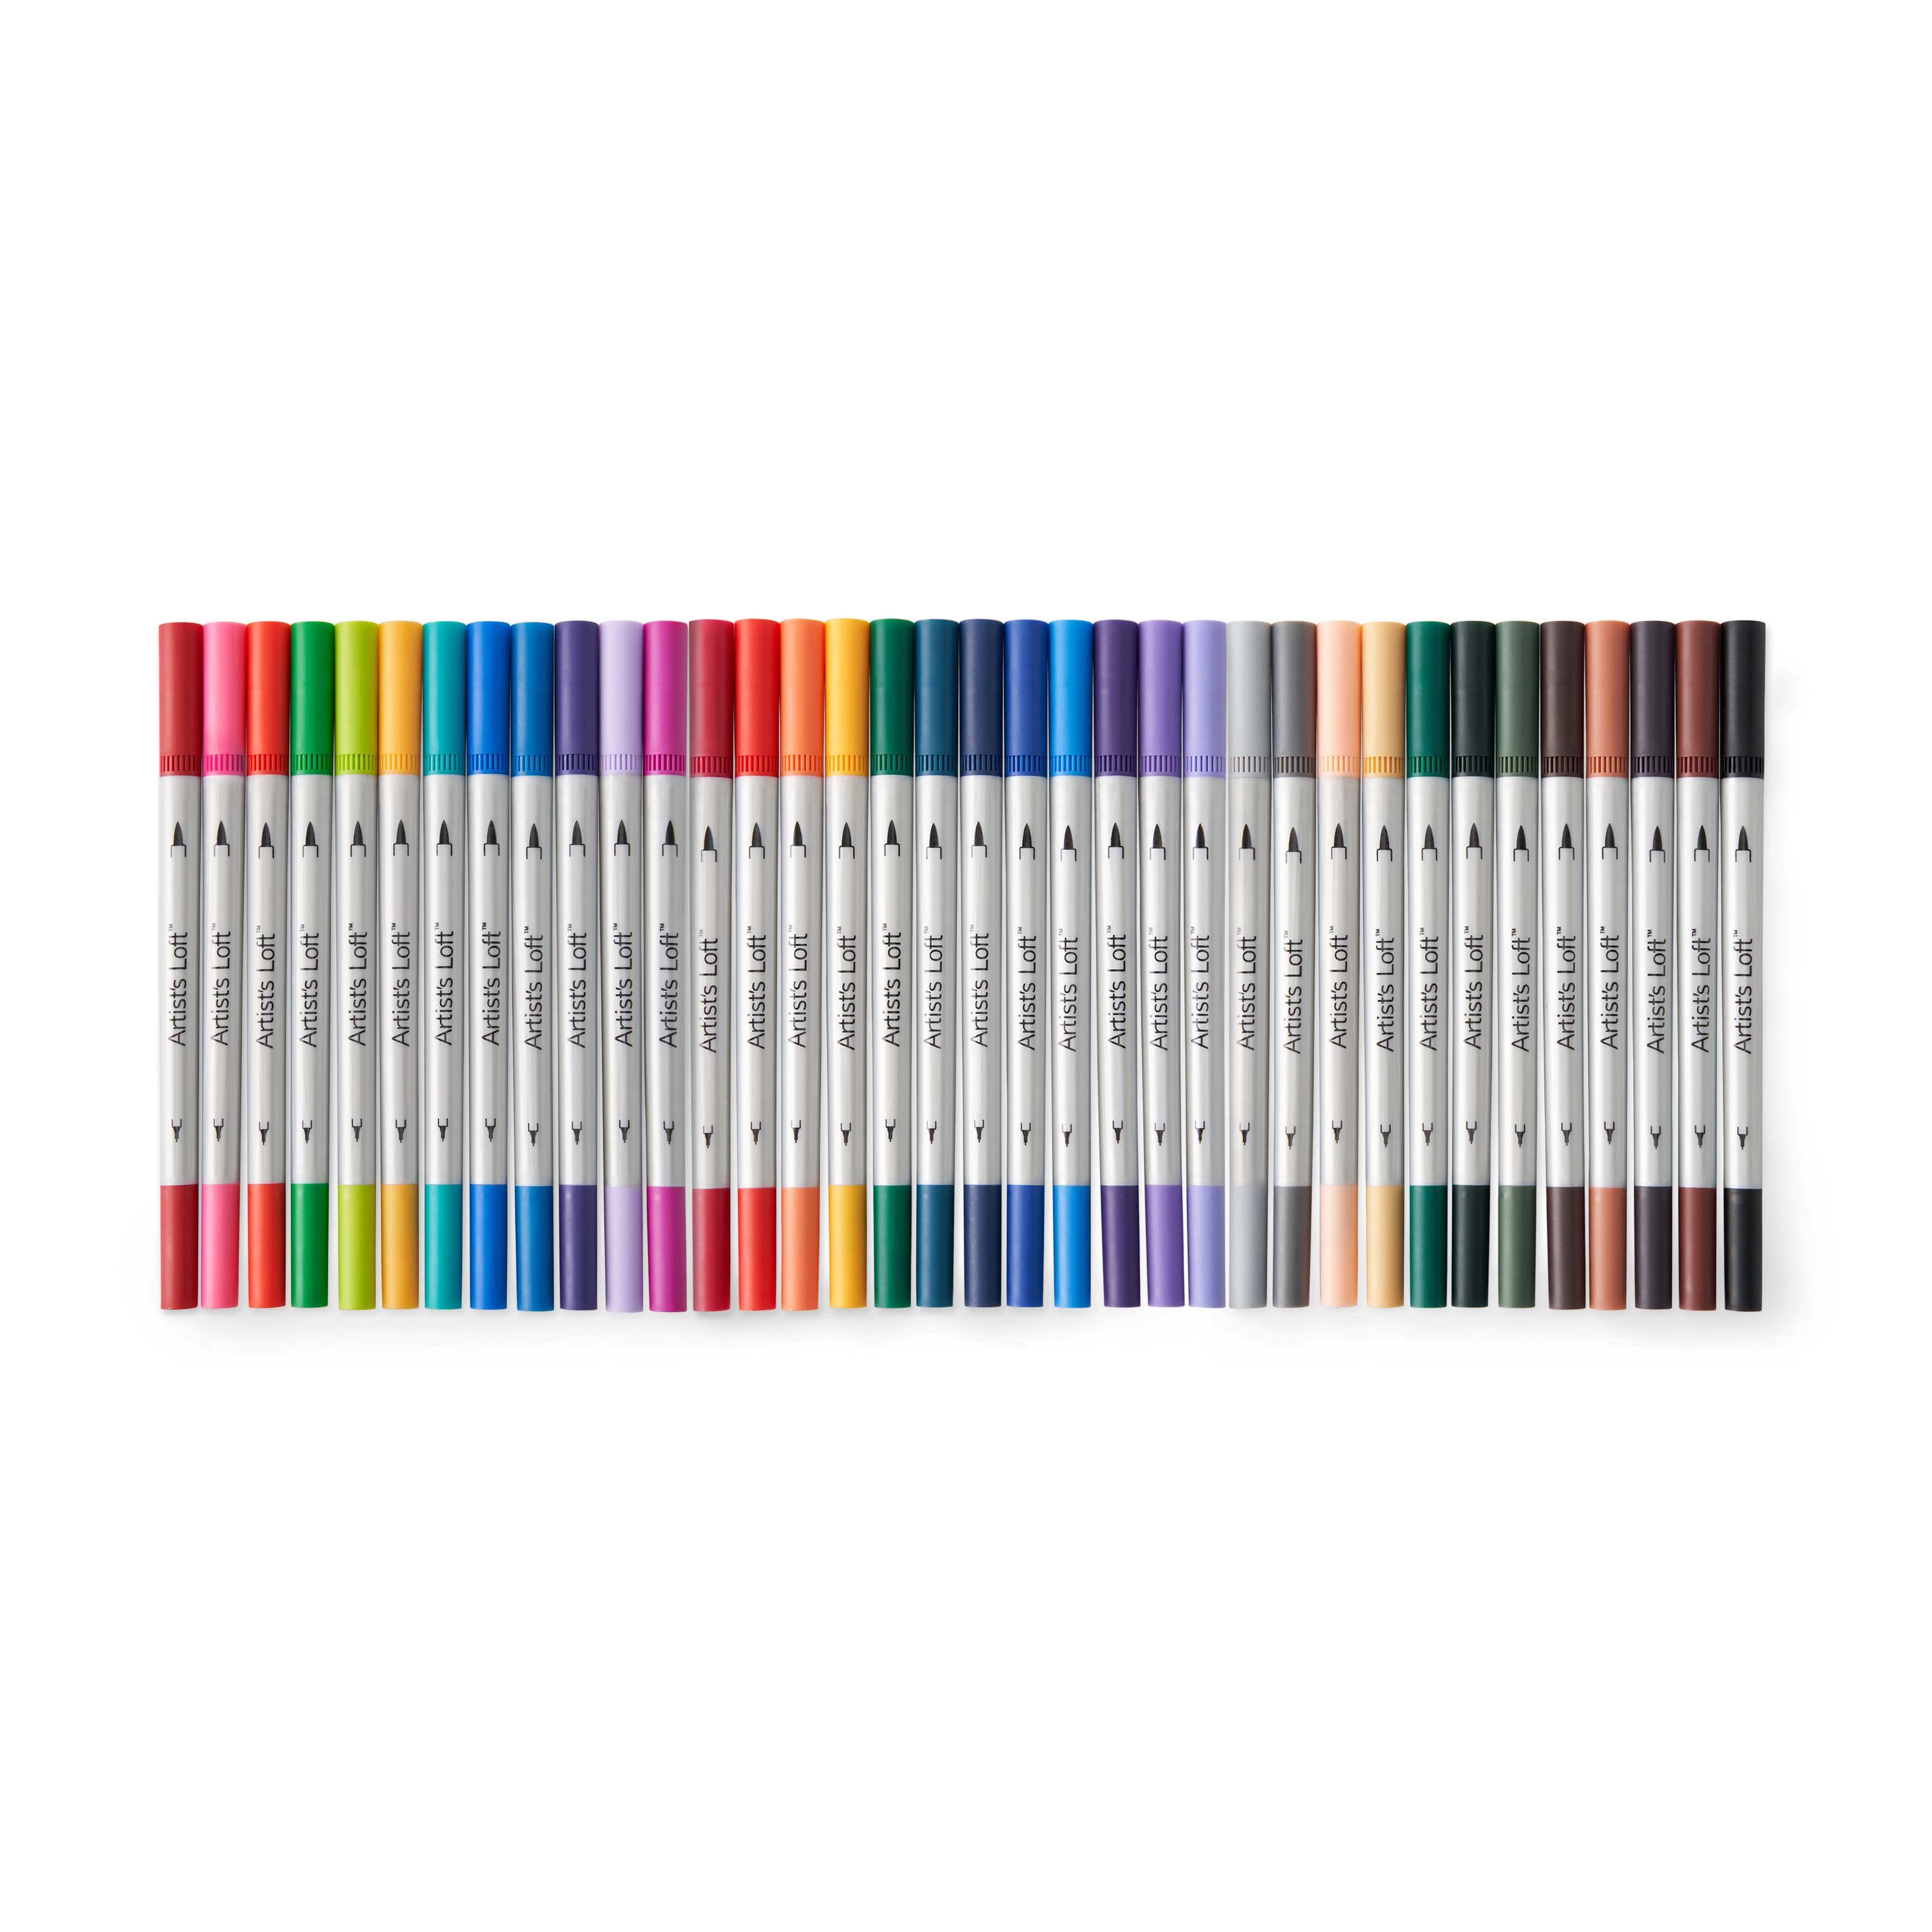 6 Packs: 48 ct. (288 total) Dual Tip Brush Fineliner Markers by Artist&#x27;s Loft&#x2122;